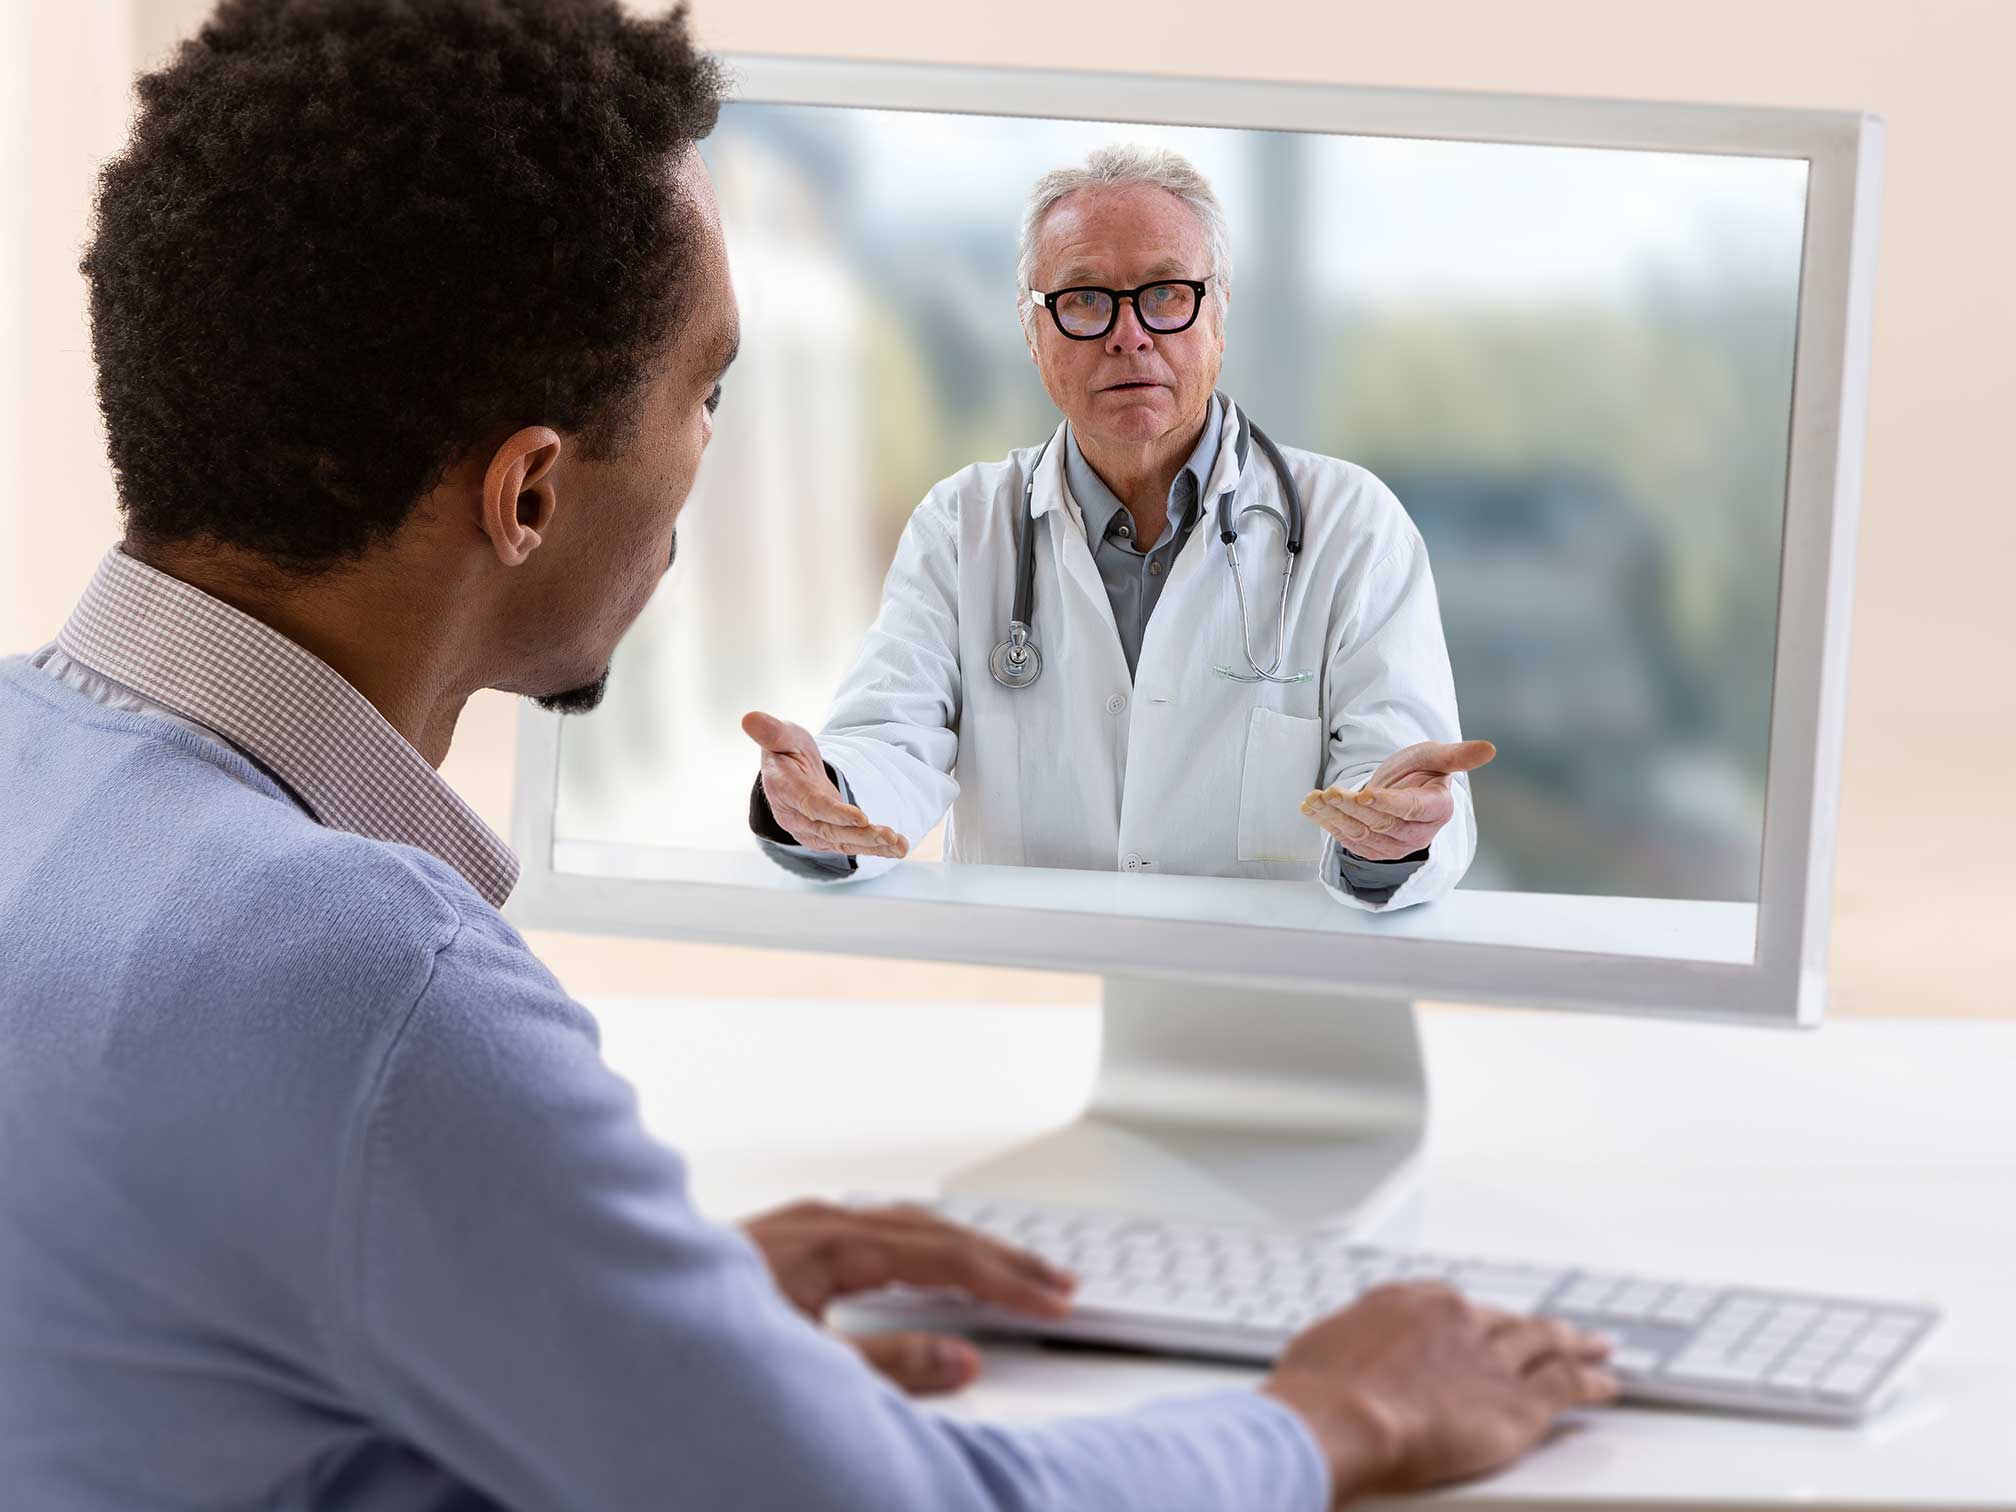 Patient talking to doctor over the computer